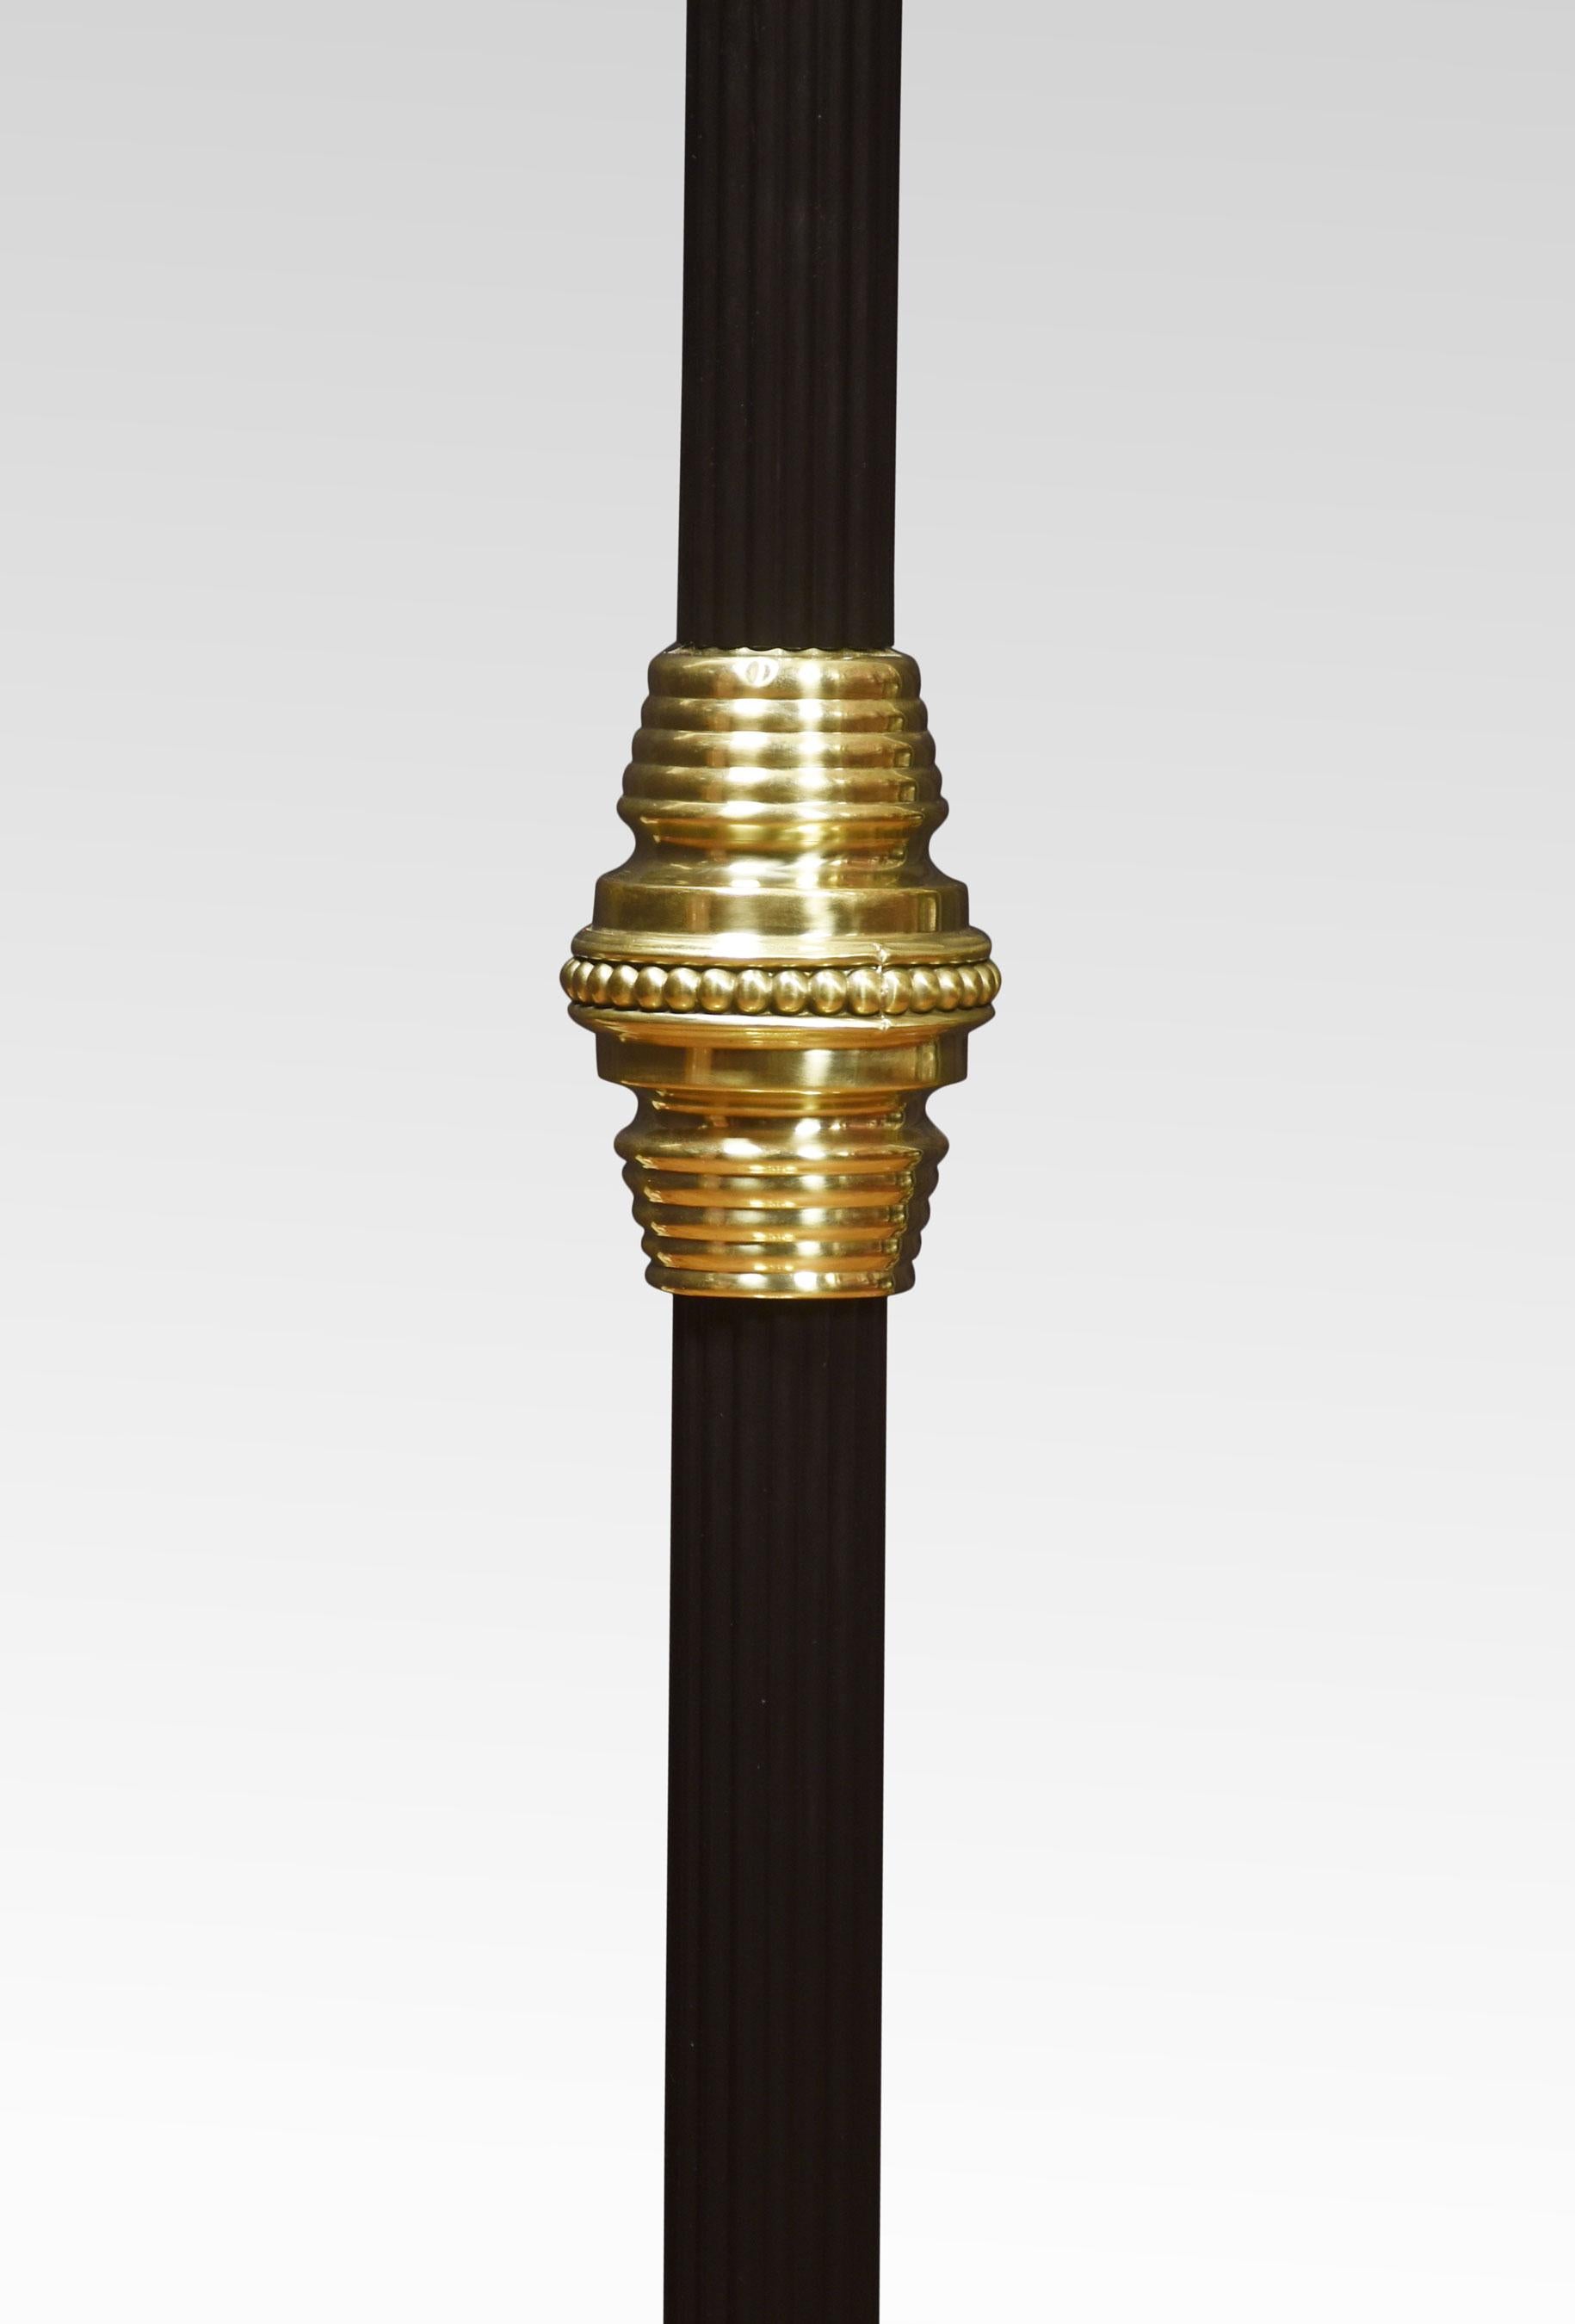 Brass standard lamp, with reeded ebonised adjustable column, raised up on circular stepped base. (The lamp has been re-wired).
Dimensions
Height 47 inches ajustable to 69 Inches
Width 16 inches
Depth 16 inches.